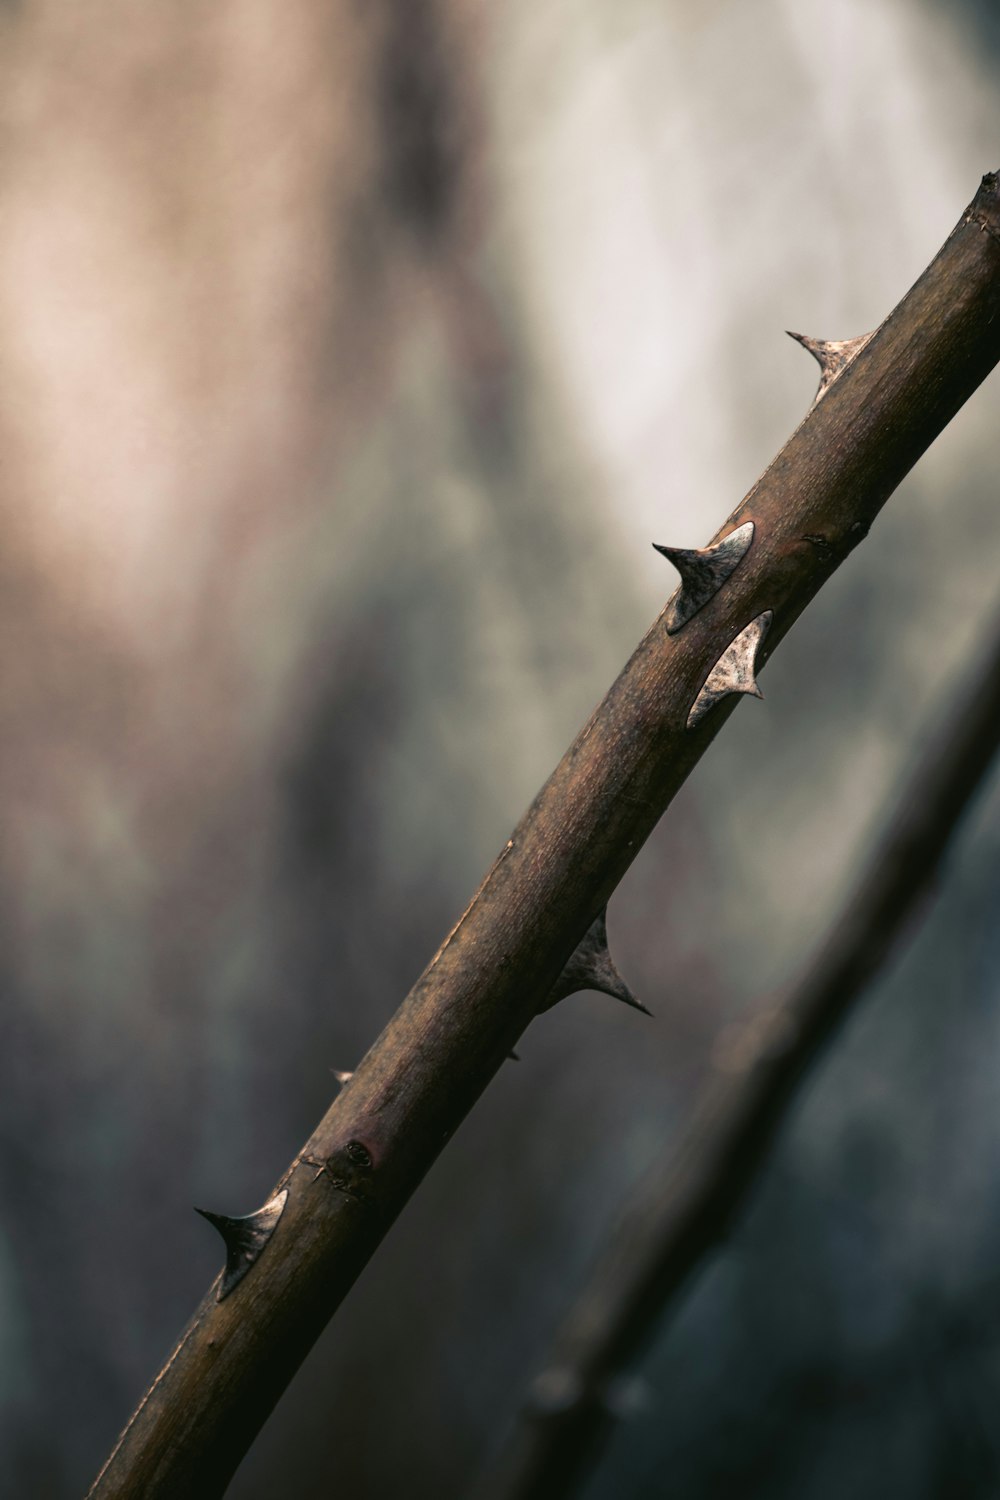 a close up of a thorn on a branch